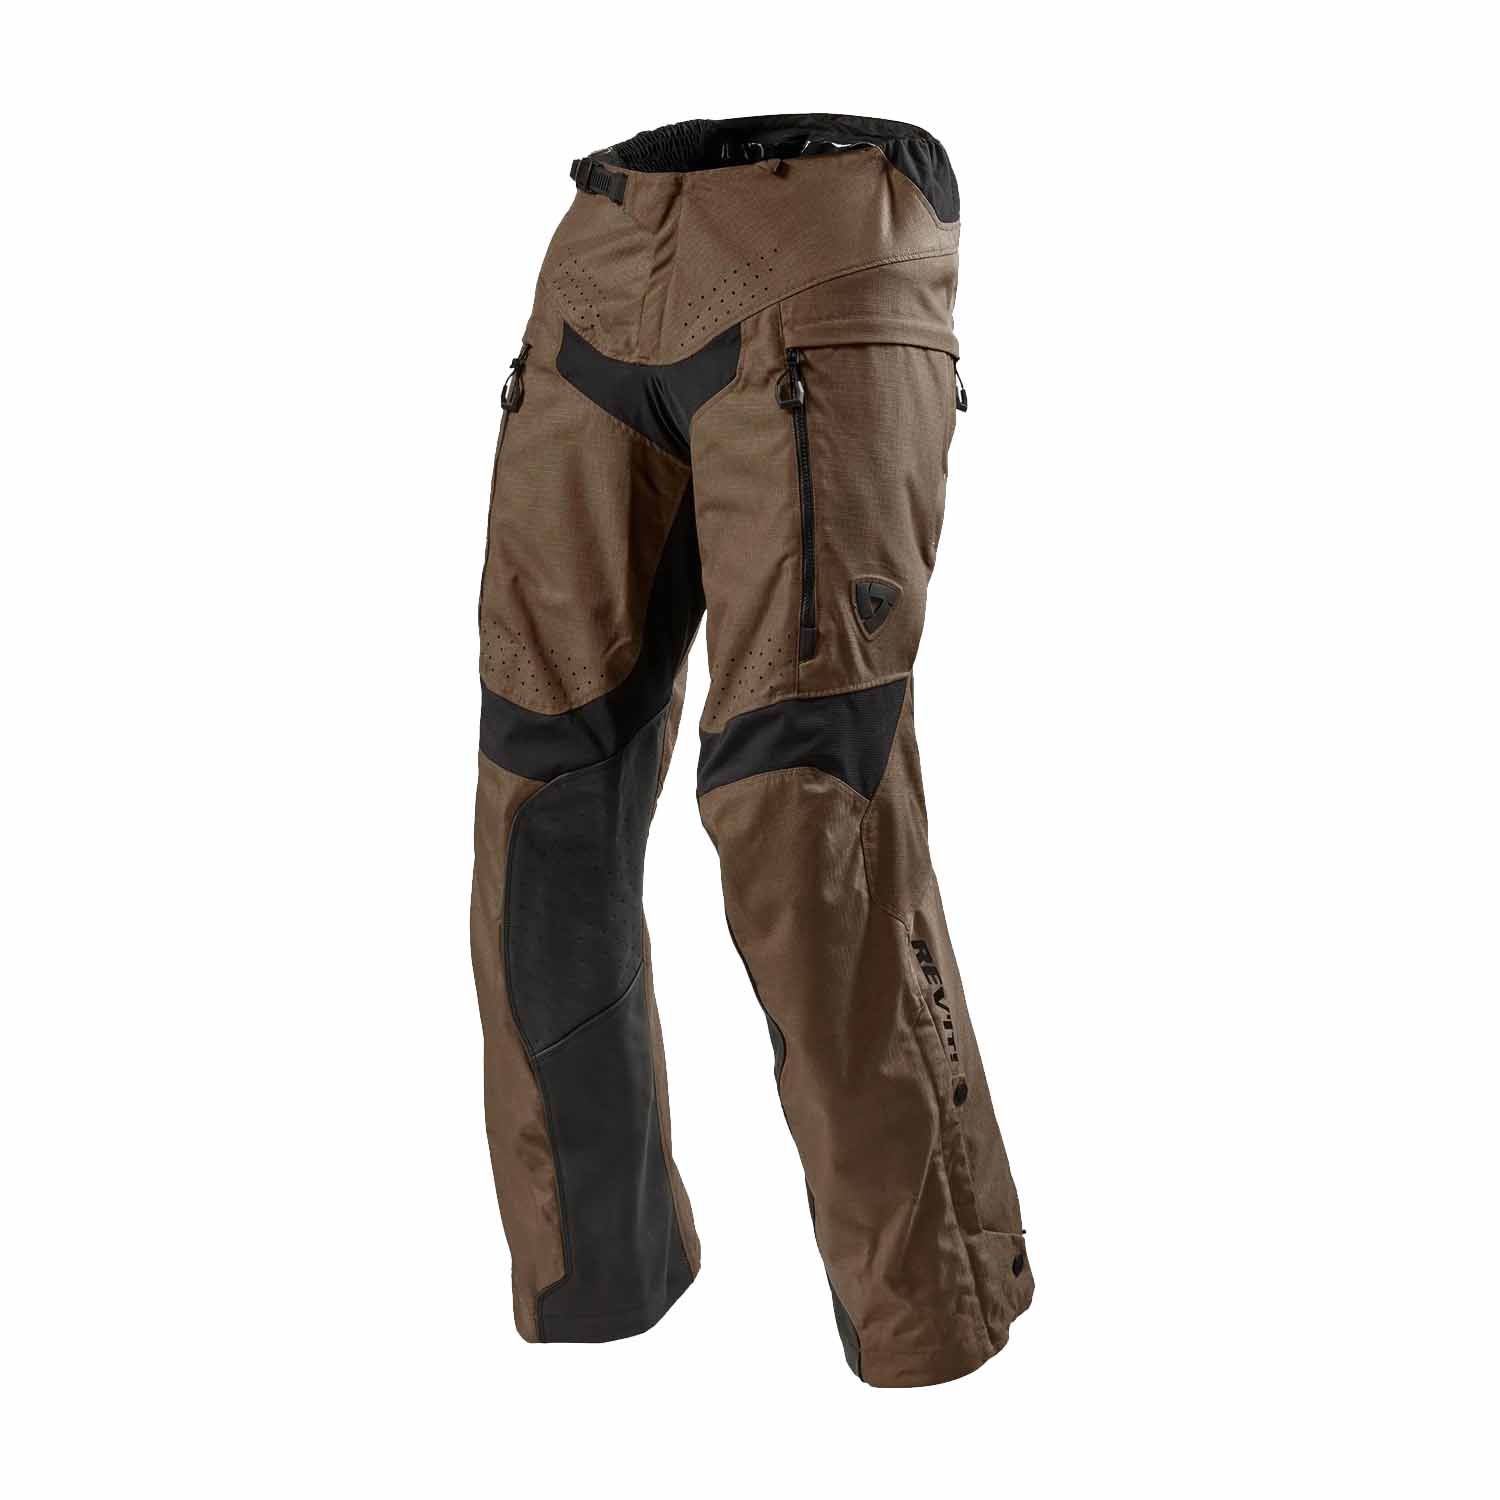 Image of REV'IT! Continent Pants Brown Standard Motorcycle Pants Talla 2XL